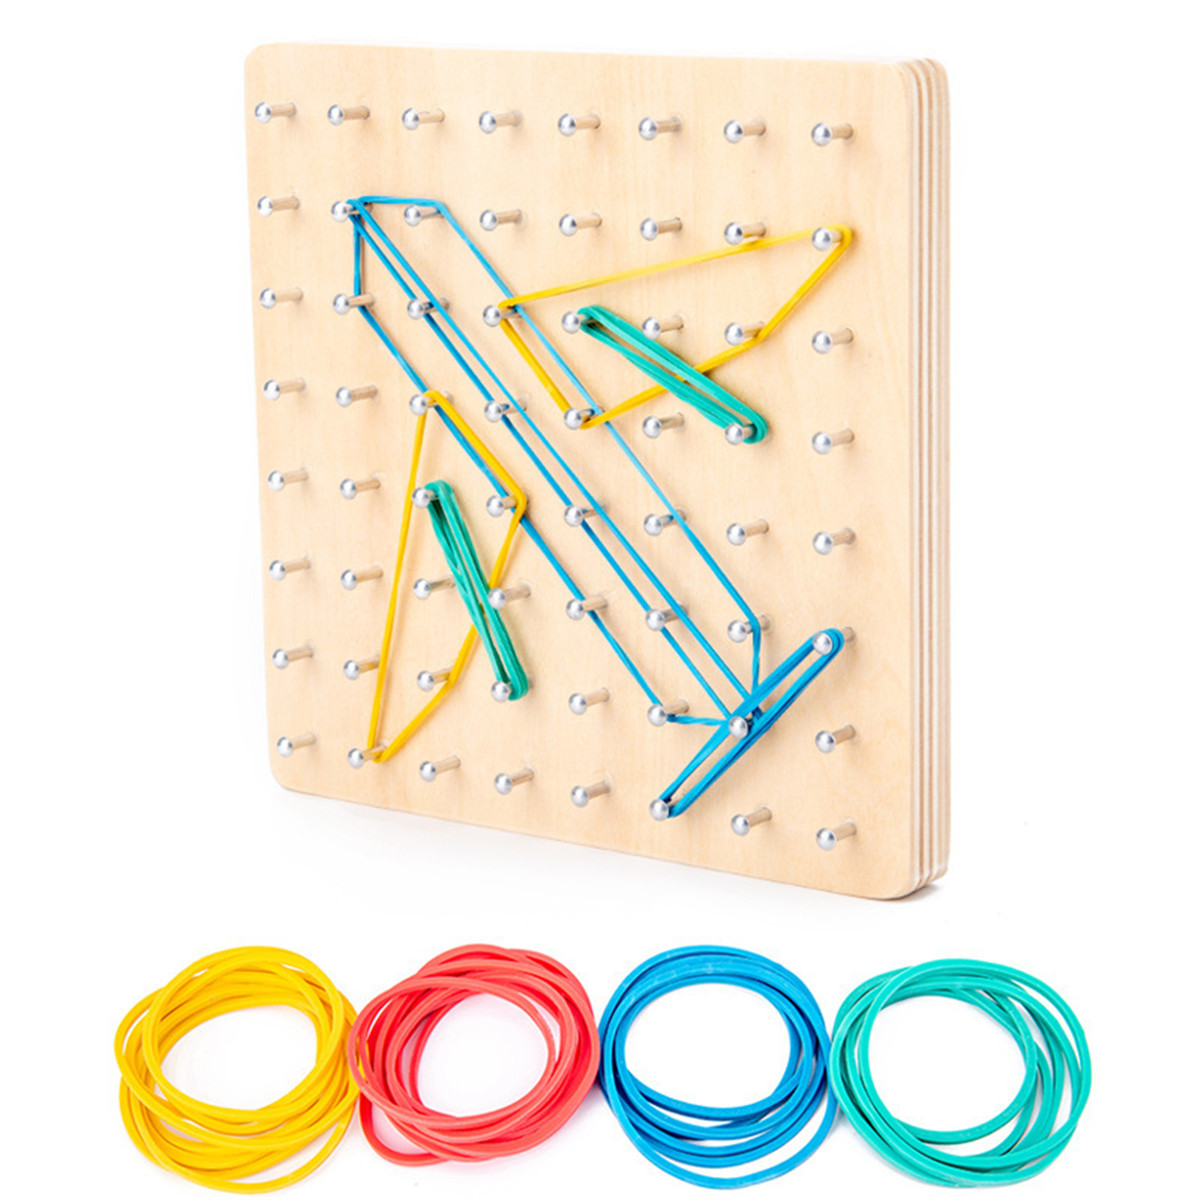 Montessori-Traditional-Teaching-Geometry-Puzzle-Pattern-Educational-School-Home-Game-Toy-for-Kids-Gi-1726969-4